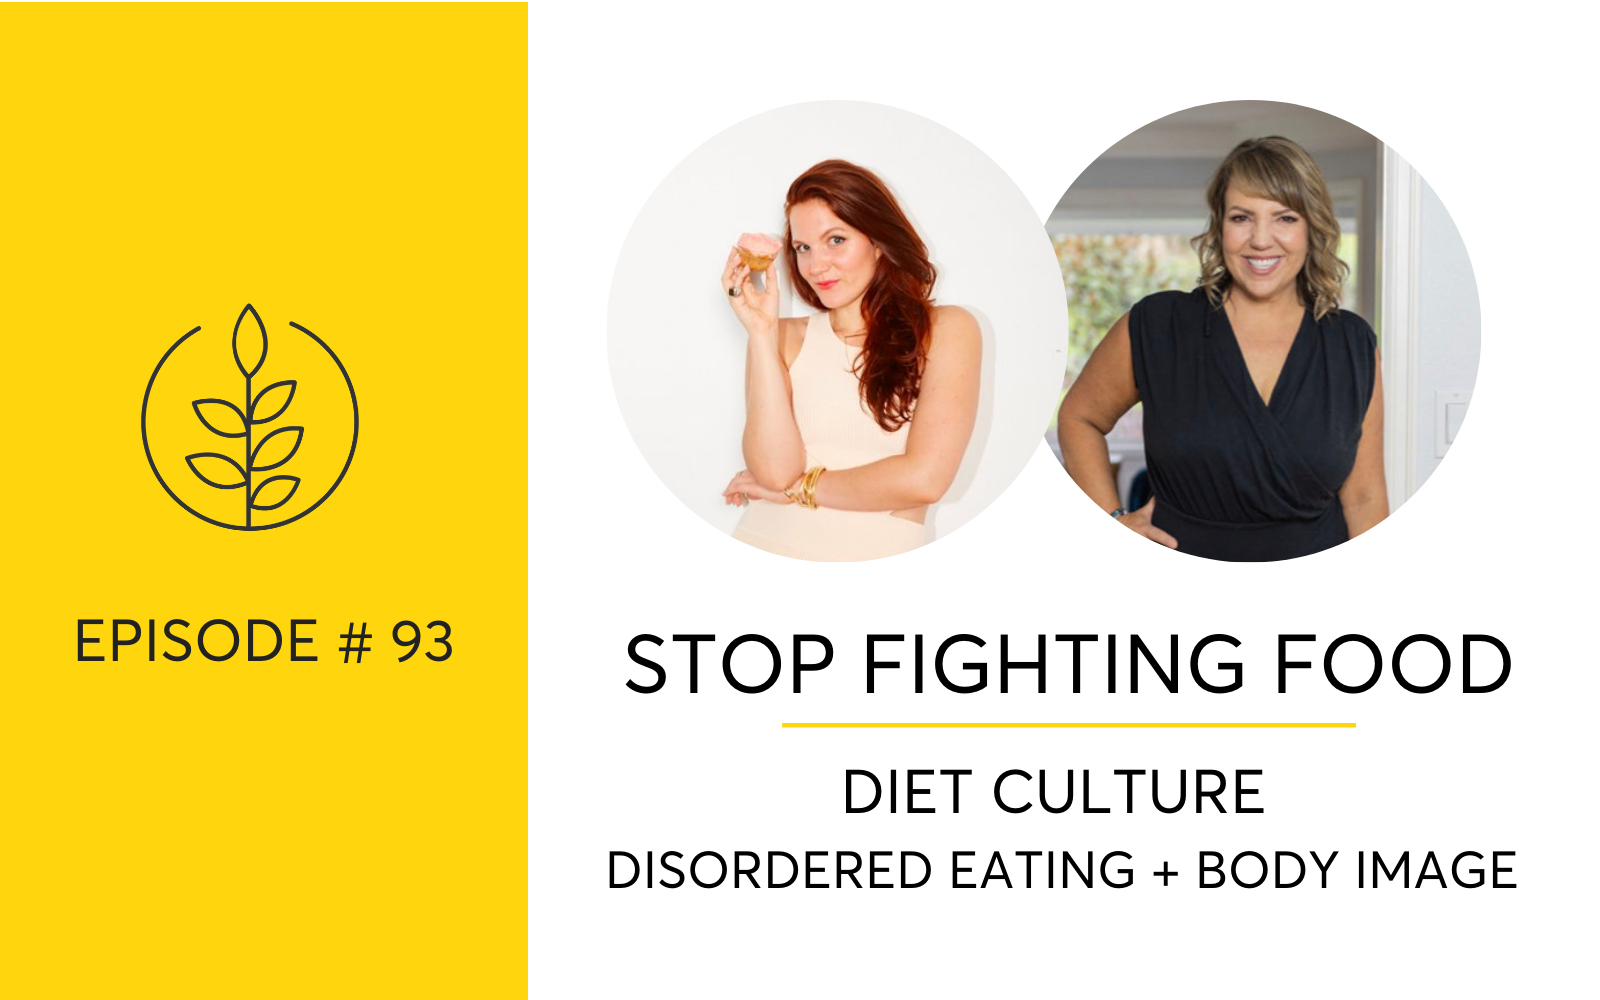 Diet Culture, Disordered Eating + How To Stop Fighting Food